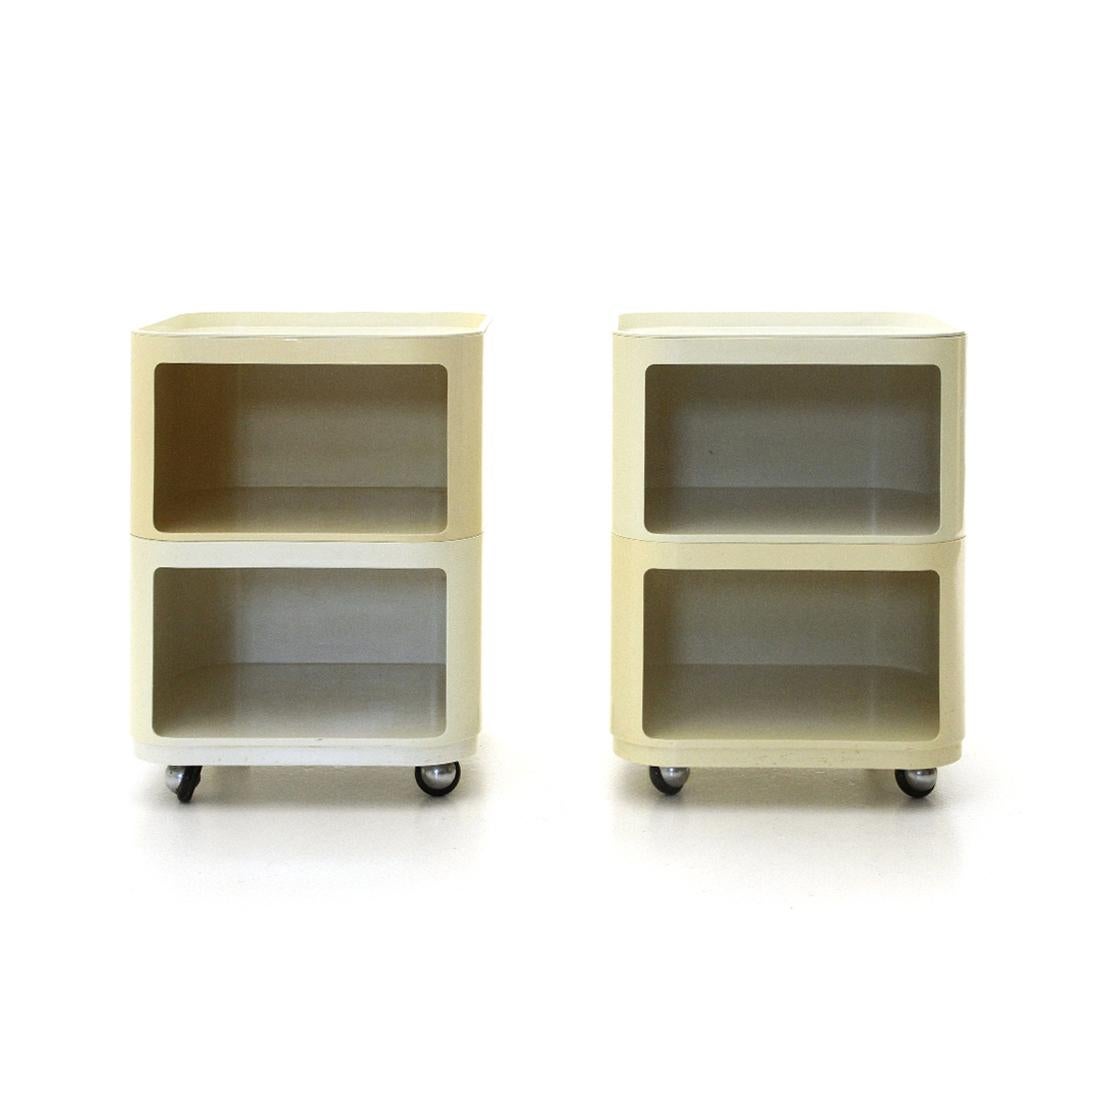 Mid-Century Modern Pair of Square Componibili Containers by Anna Castelli Ferrieri for Kartell 1970